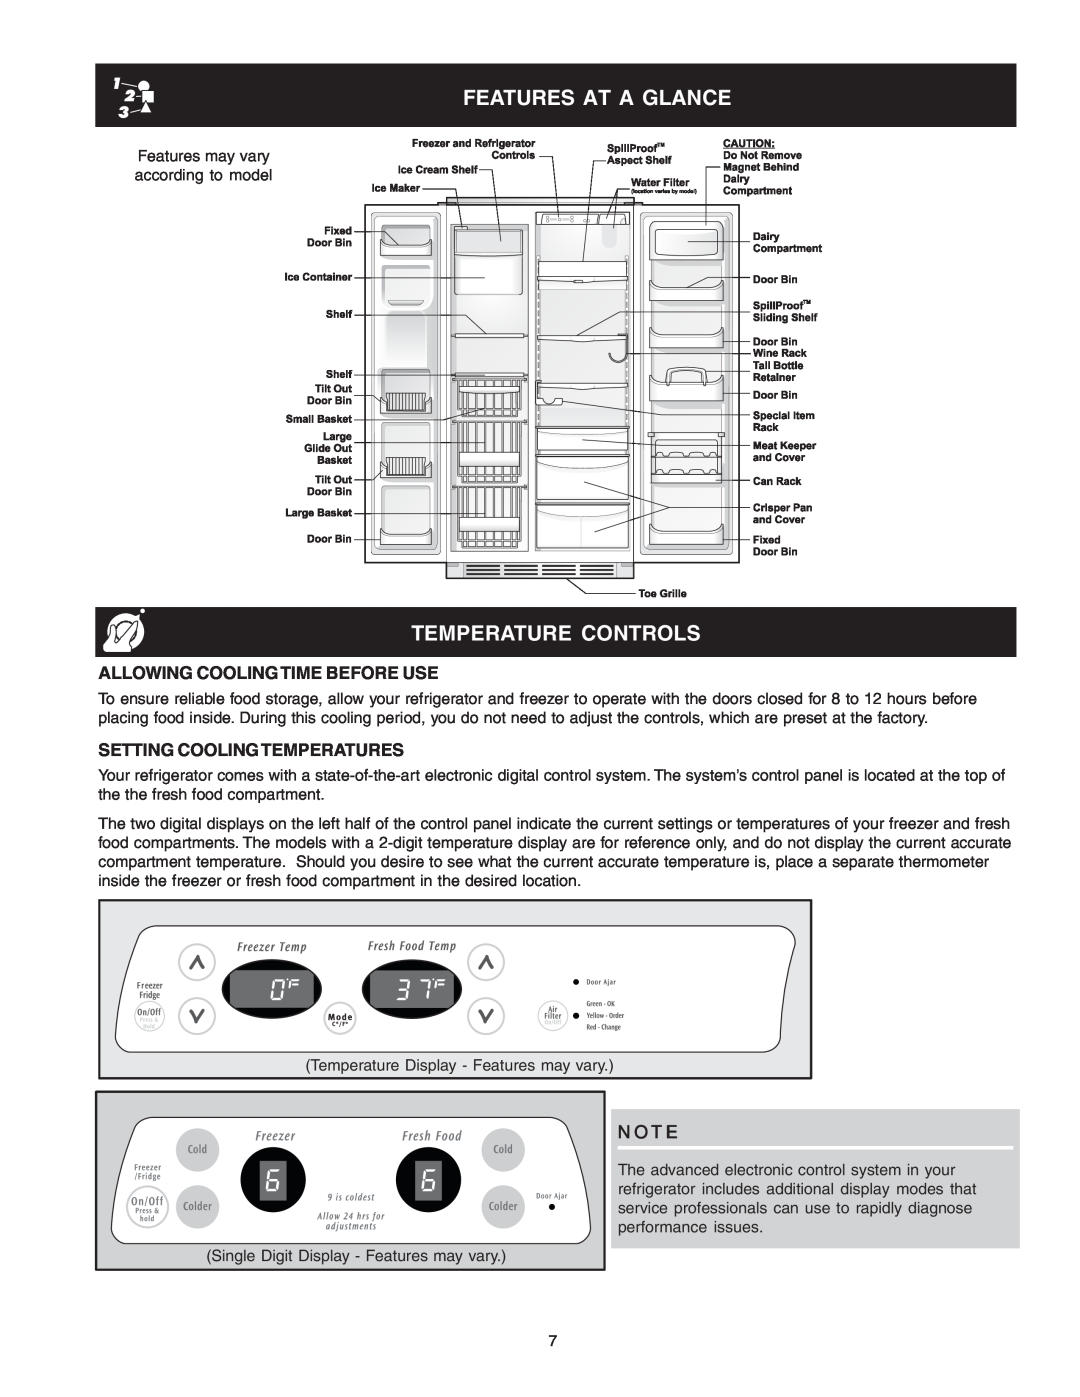 Frigidaire 241721000 manual Features At A Glance, Temperature Controls, Allowing Coolingtime Before Use 